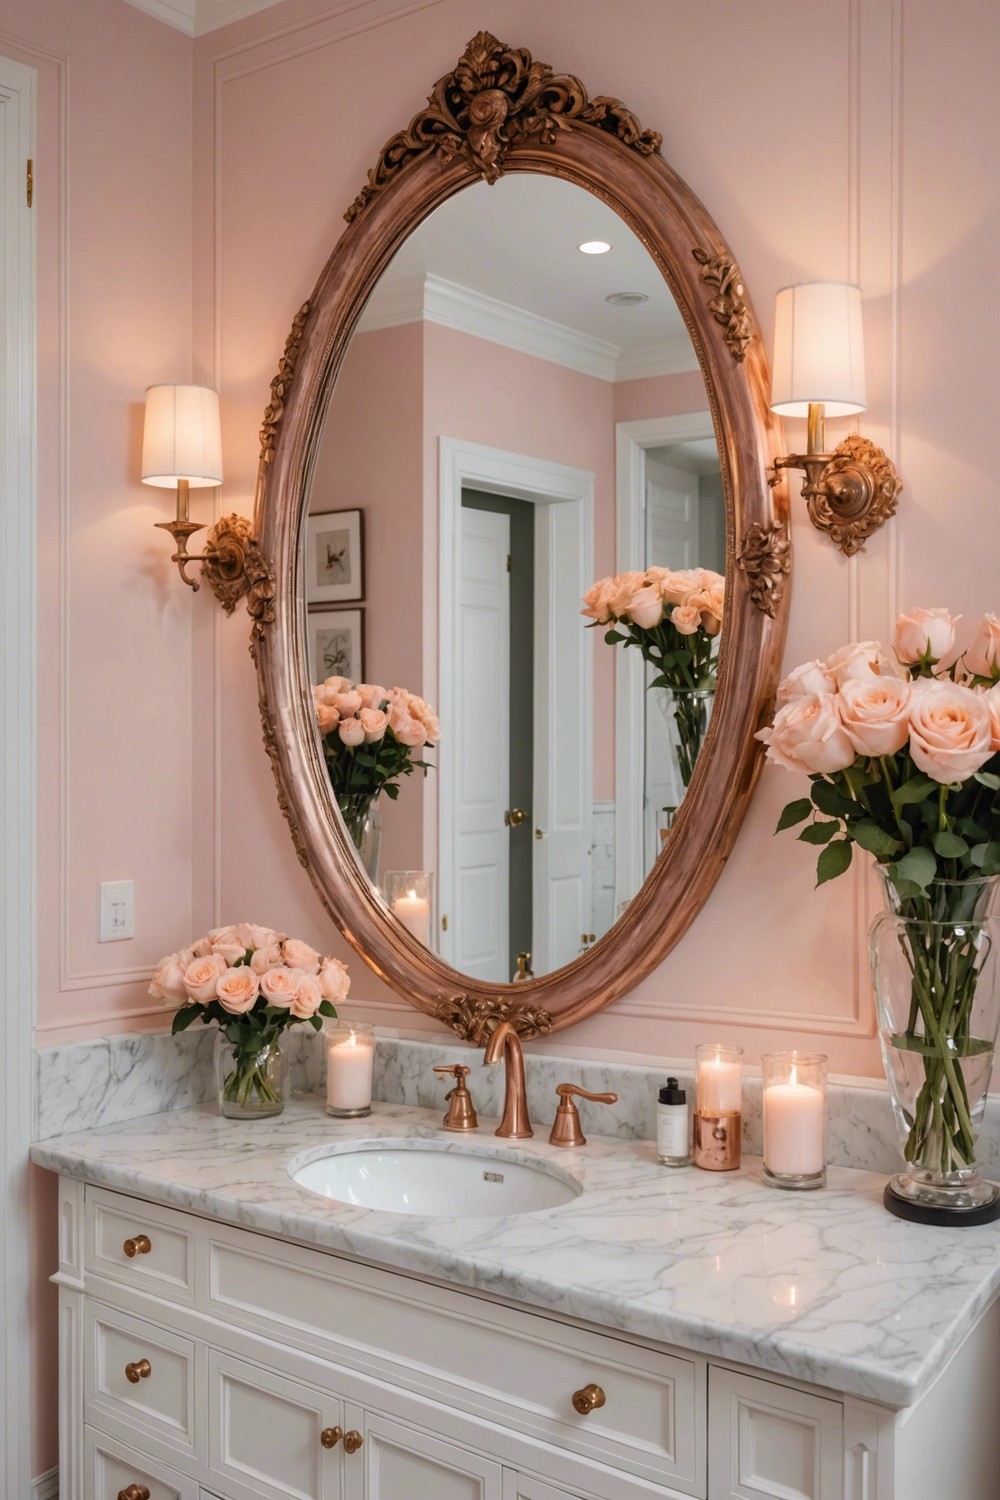 Rose Gold Mirrors for a Touch of Elegance